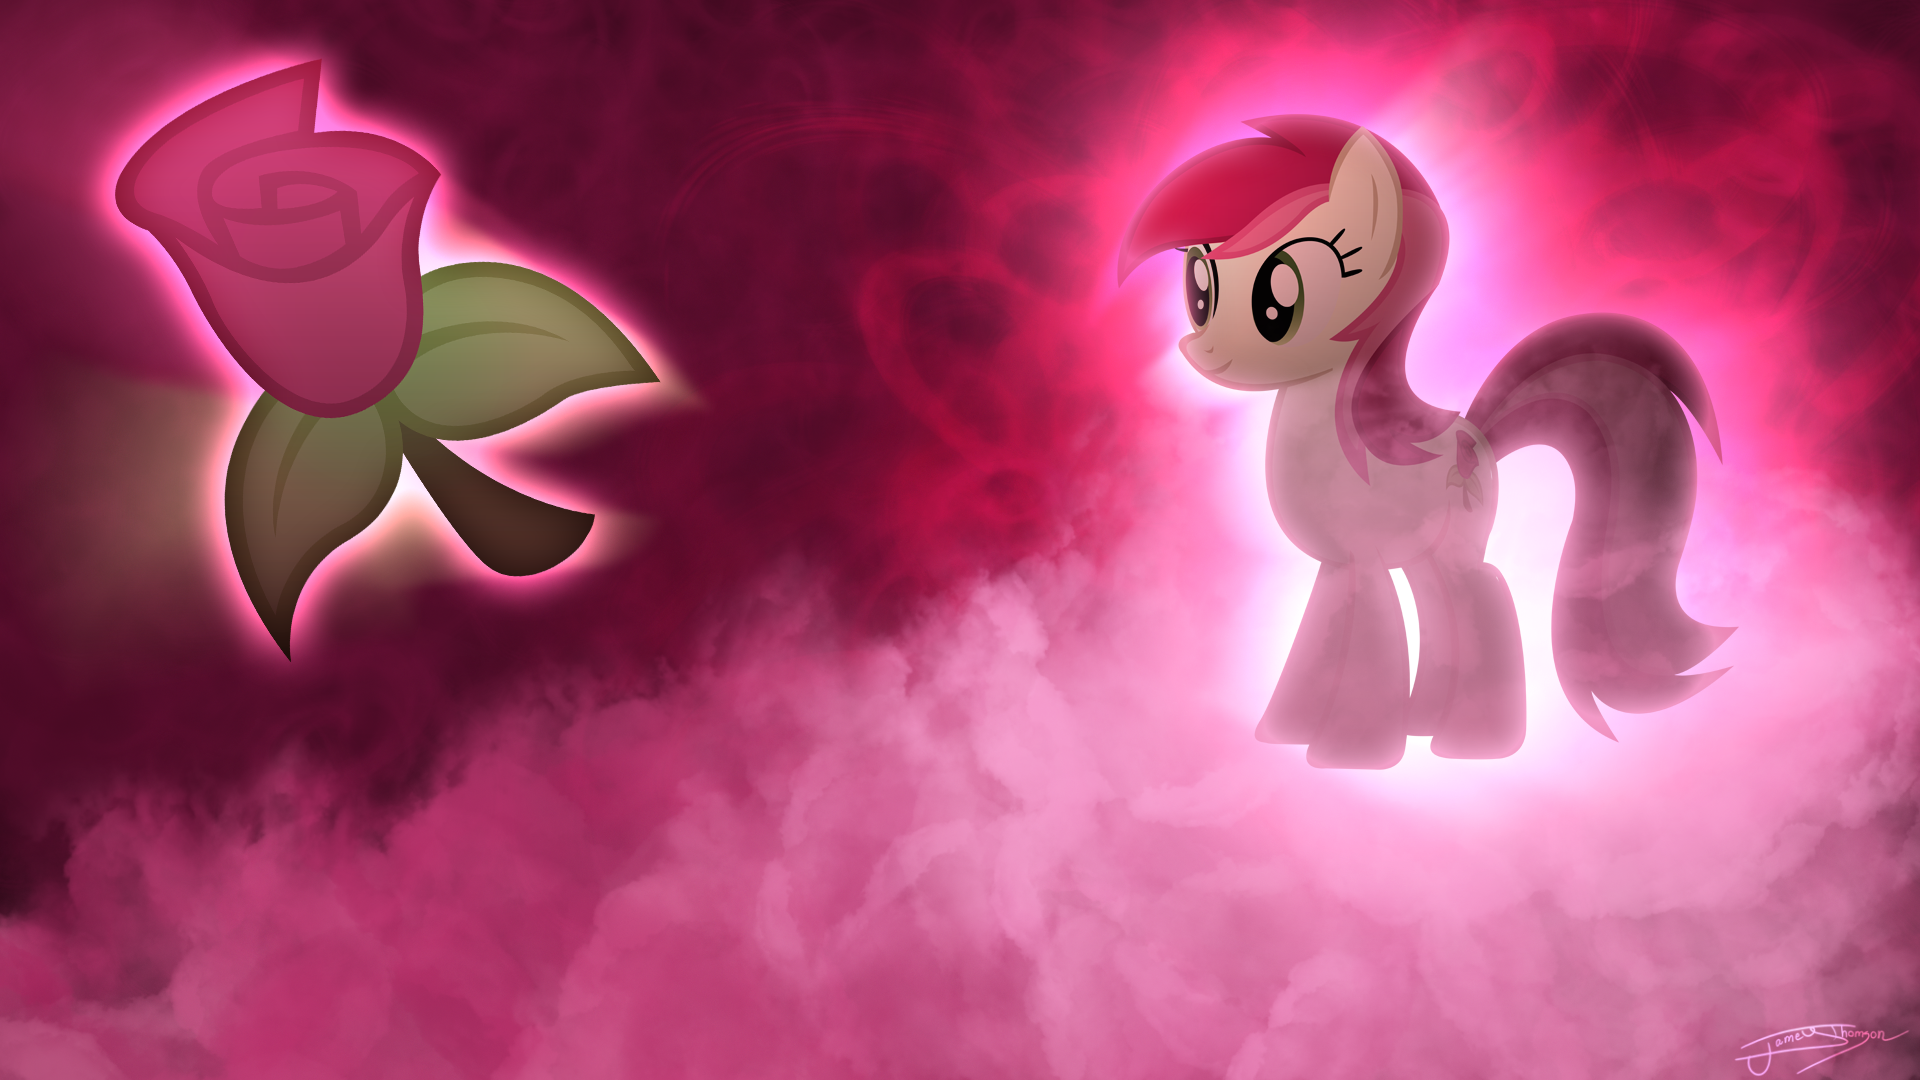 Rose - Blossom Clouds by CptOfTheFriendship, Jamey4 and Waranto